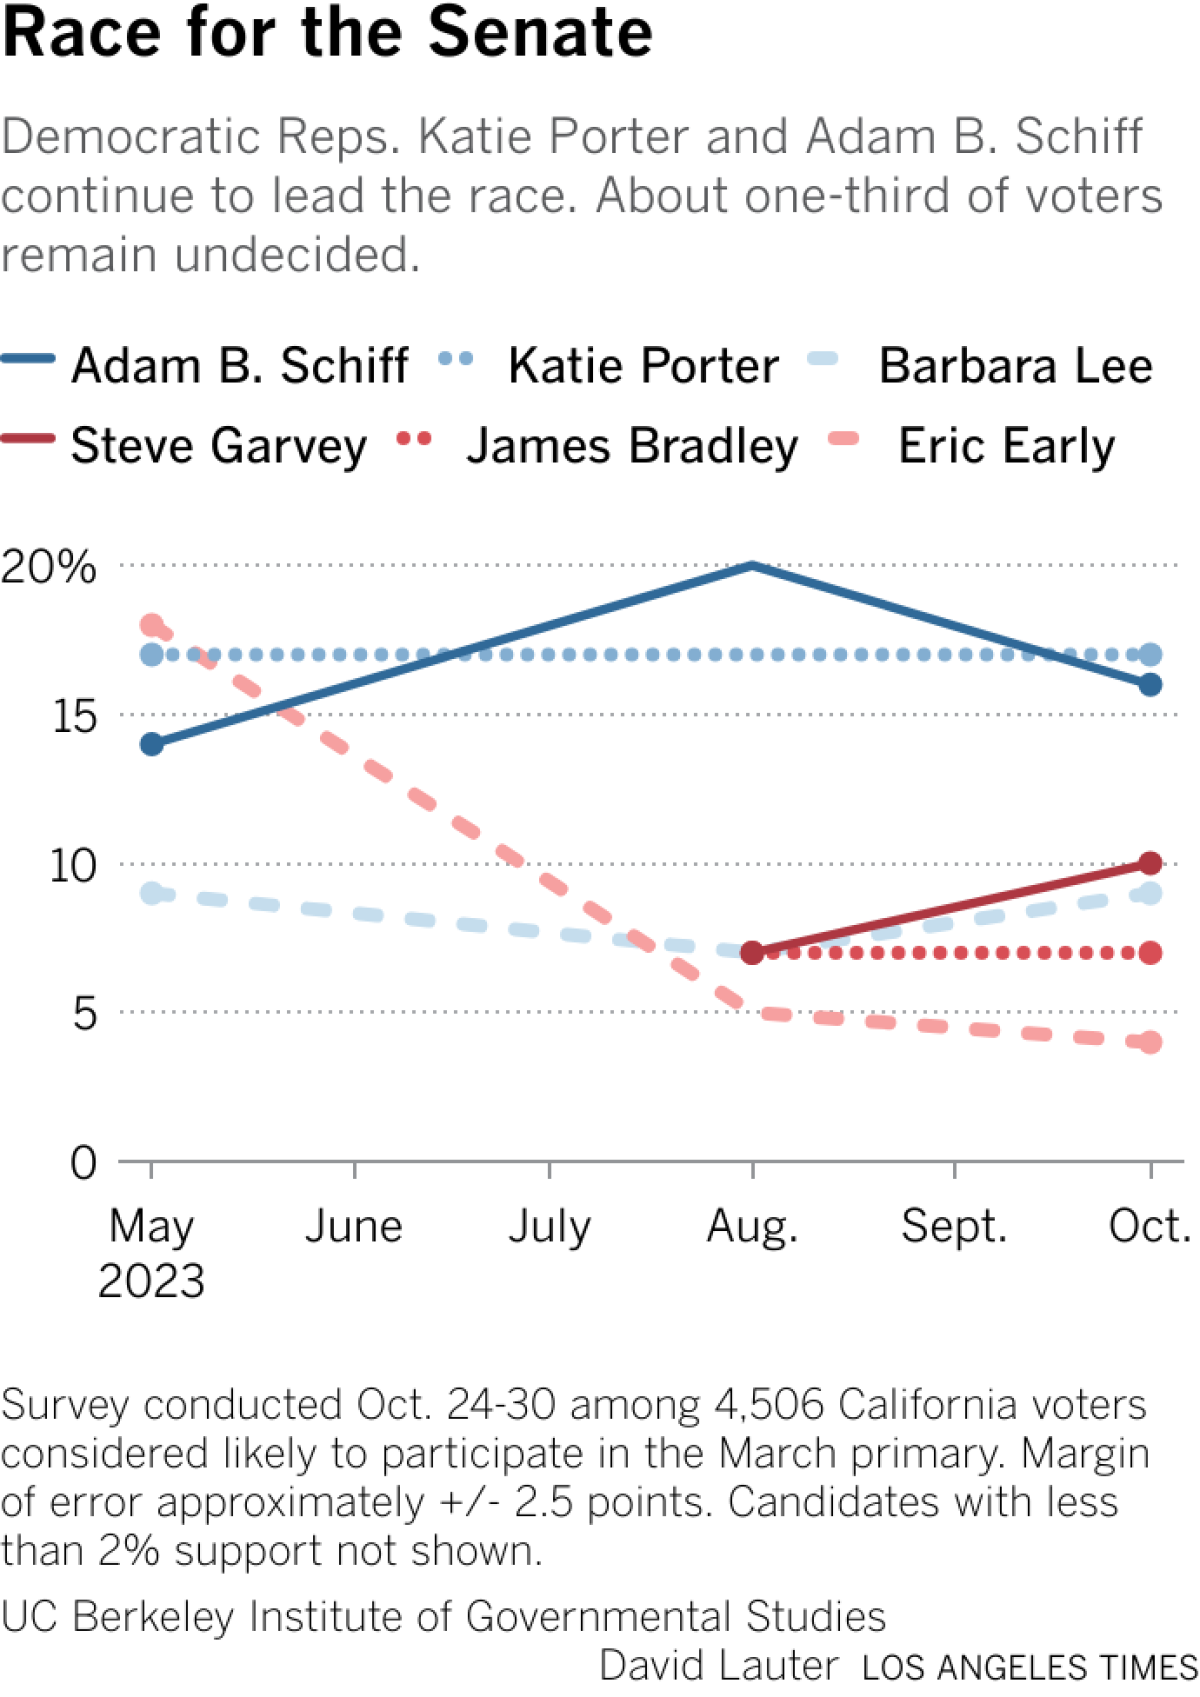 Democratic Reps. Katie Porter and Adam B. Schiff continue to lead the race. About one-third of voters remain undecided.